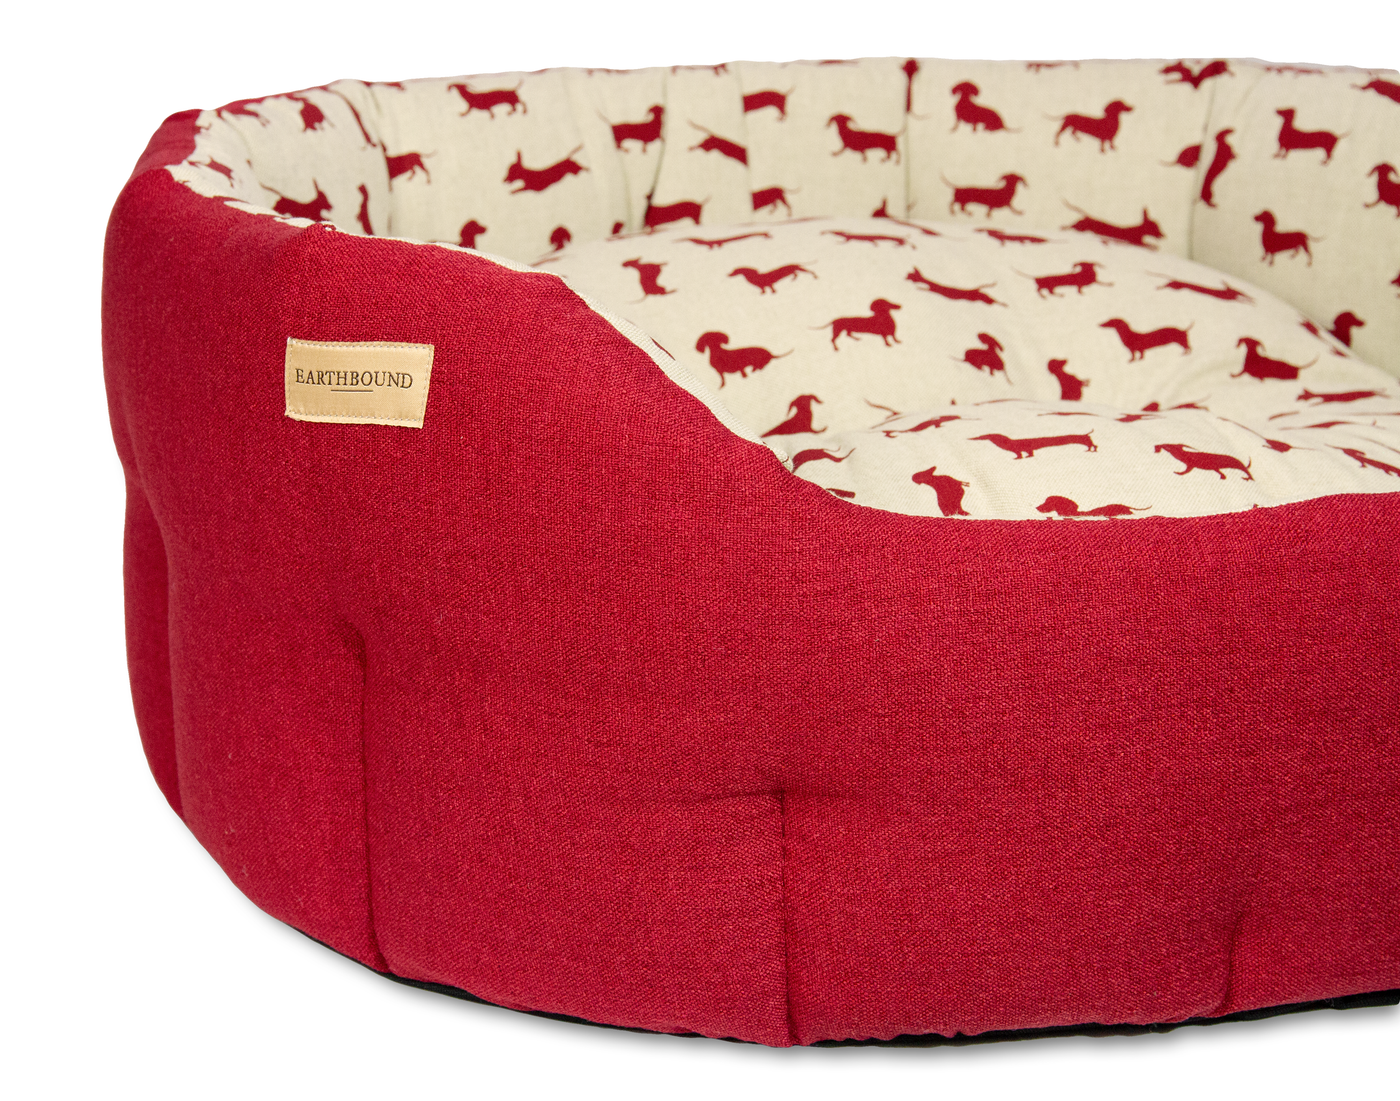 Classic Brushed Dachshund Bed Red